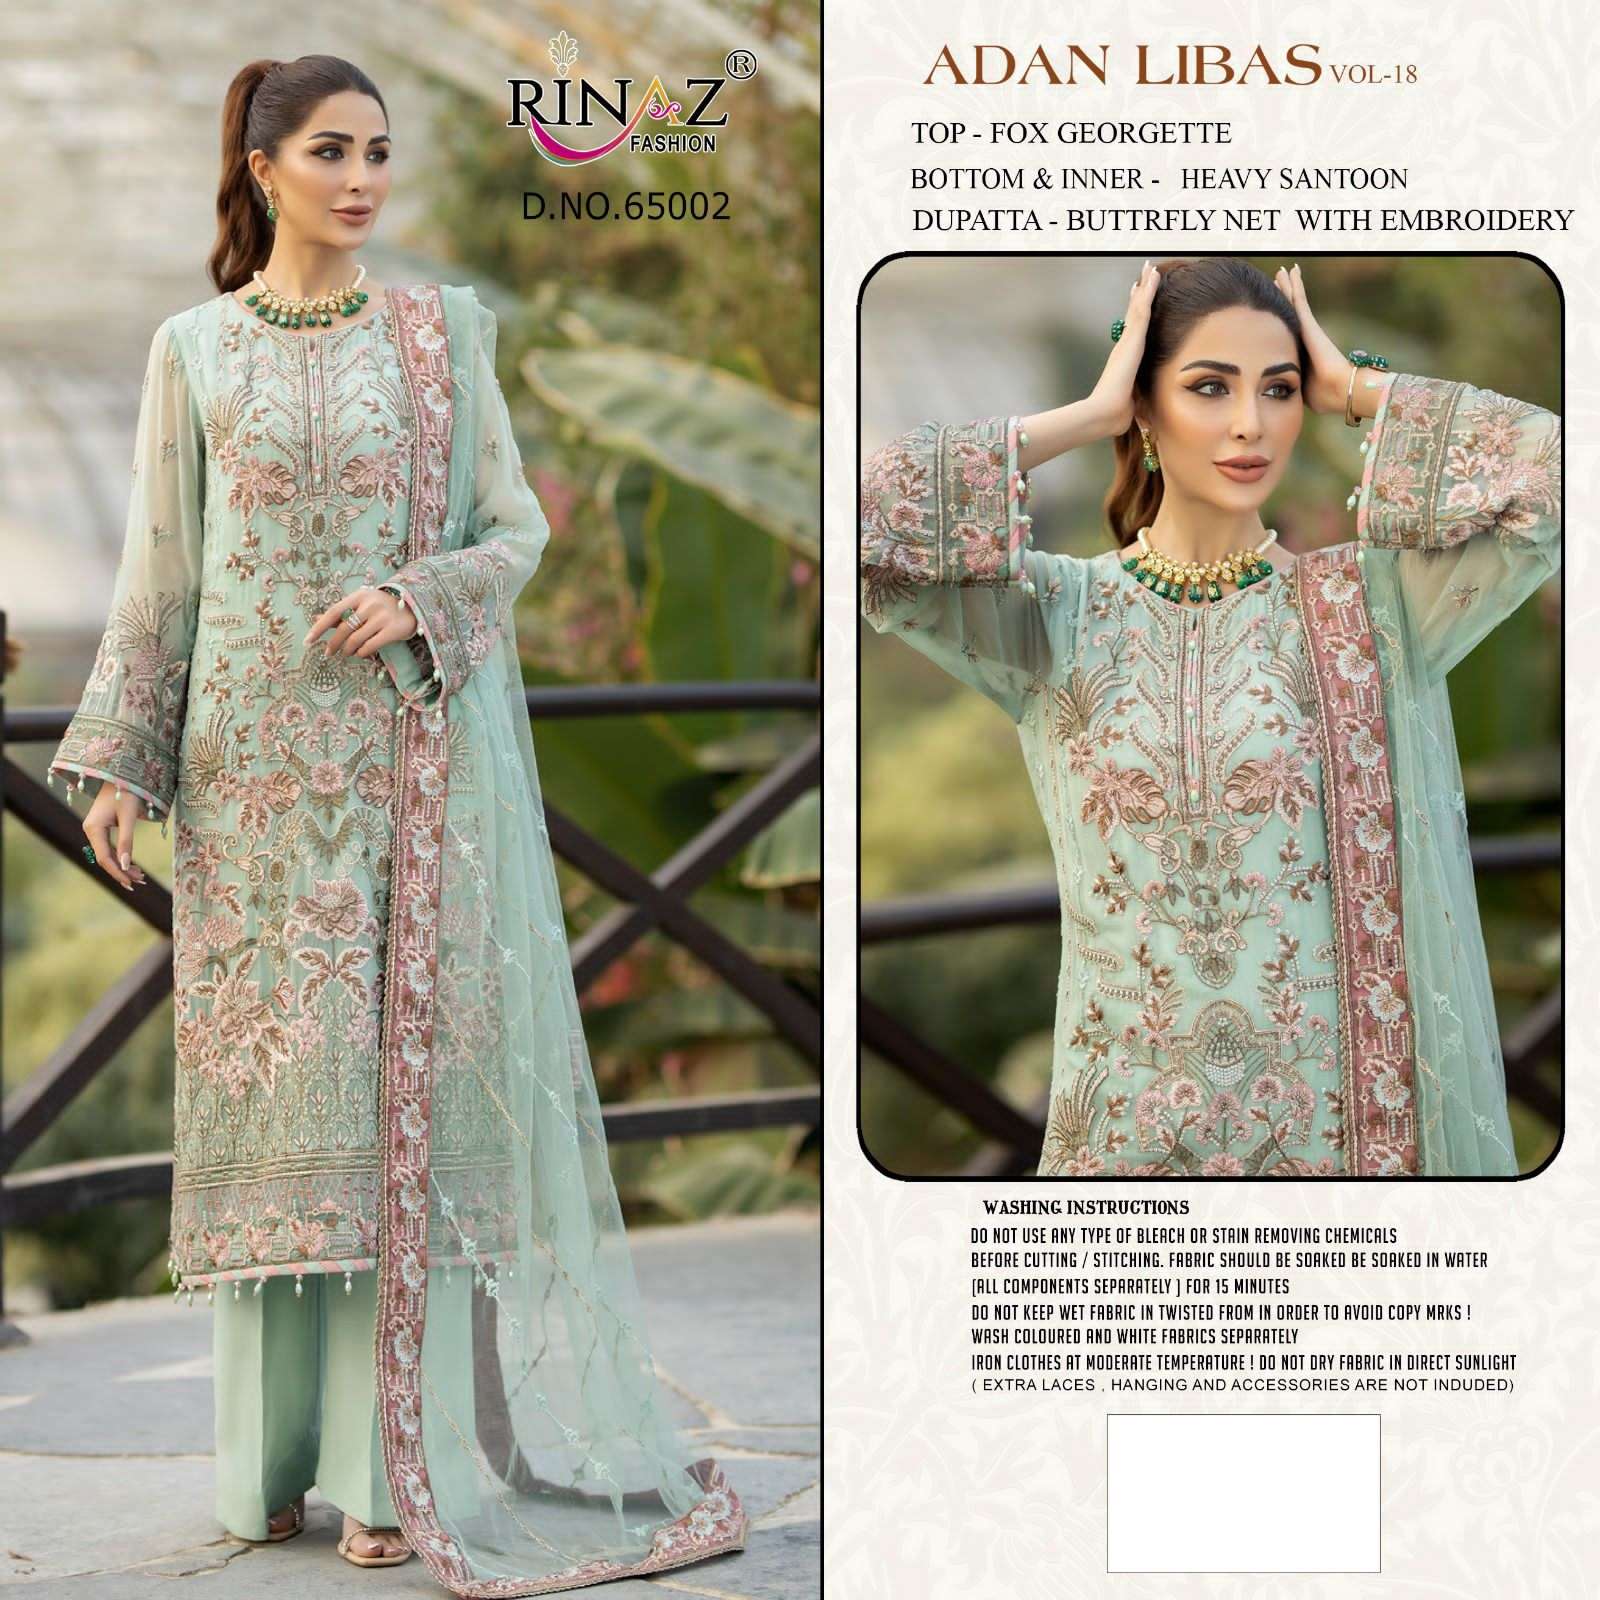 ADAN LIBAS VOL-18 BY RINAZ FASHION 65001 TO 65005 SERIES BEAUTIFUL STYLISH PAKISTANI SUITS FANCY COLORFUL CASUAL WEAR & ETHNIC WEAR & READY TO WEAR FAUX GEORGETTE EMBROIDERY DRESSES AT WHOLESALE PRICE